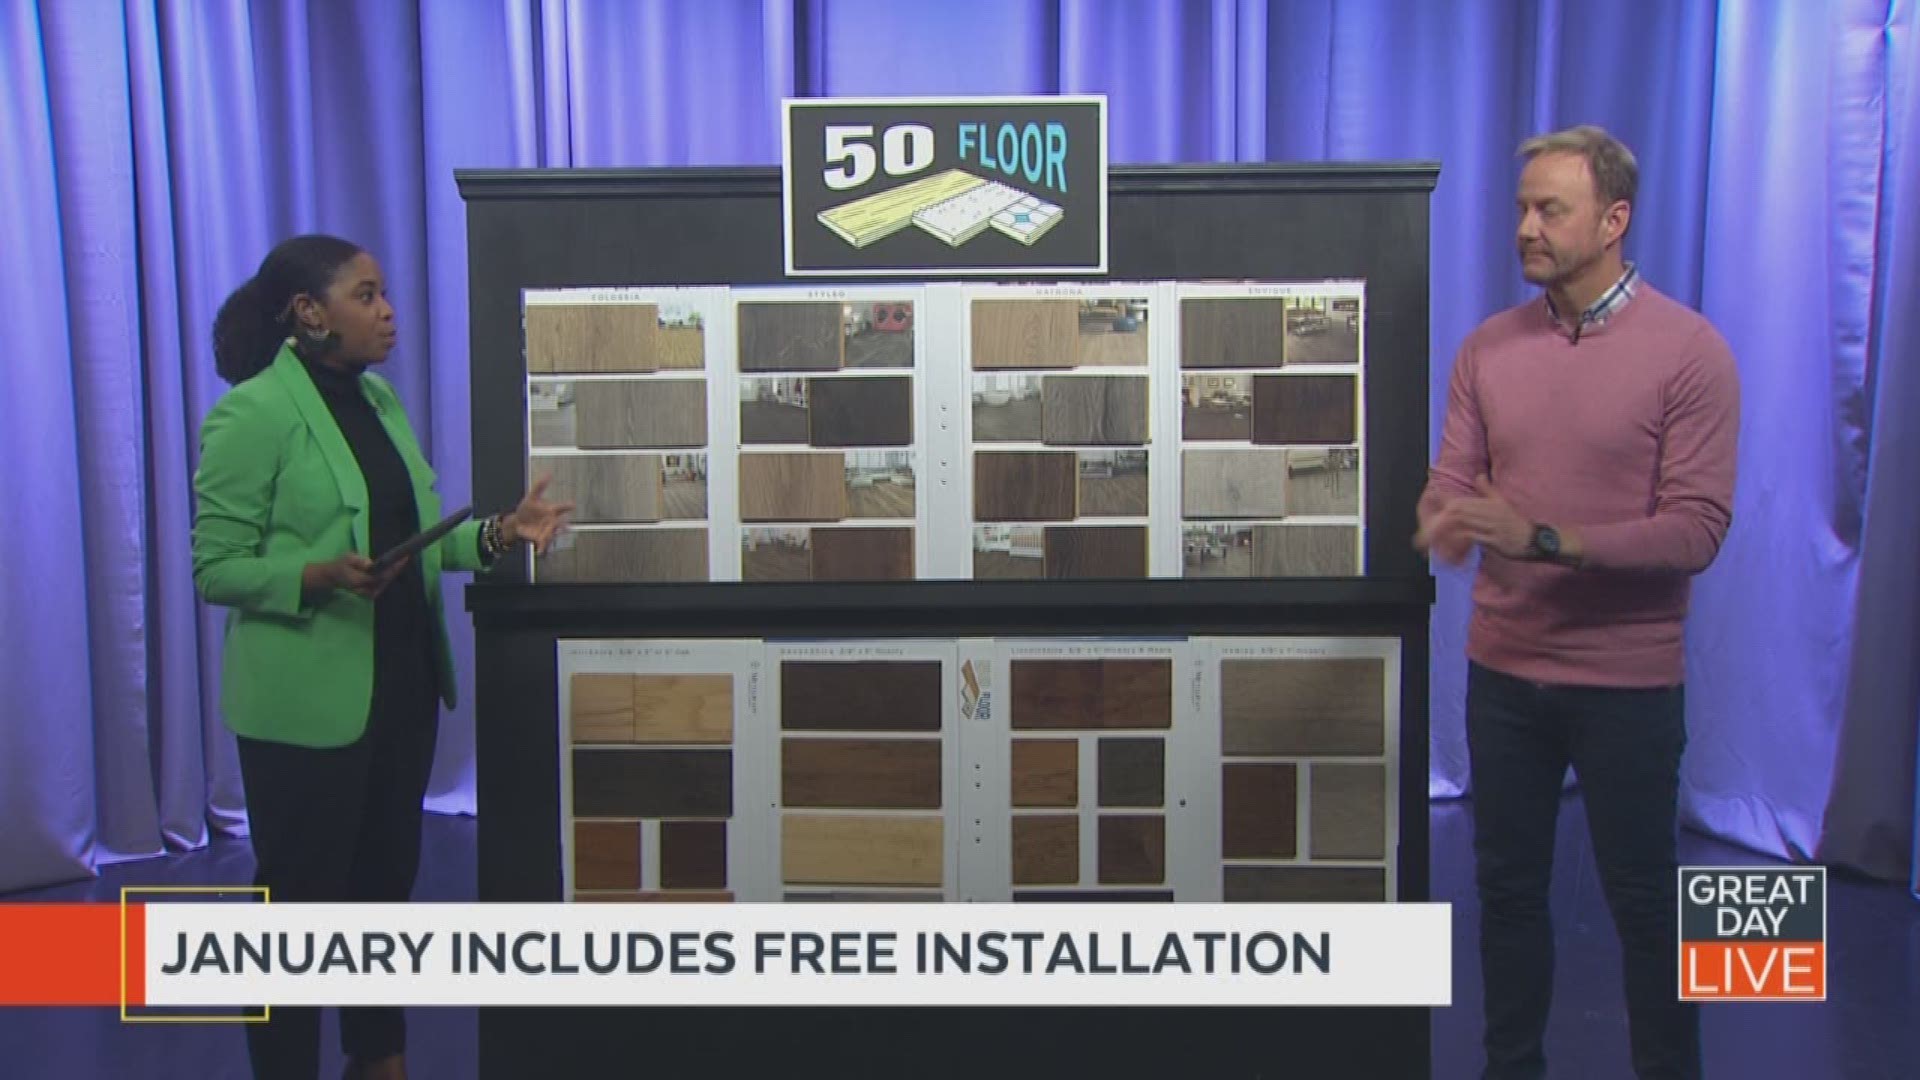 50 Floor offers a variety of popular carpet, tile, vinyl, laminate, and hardwood flooring products, installed at incredibly low prices.